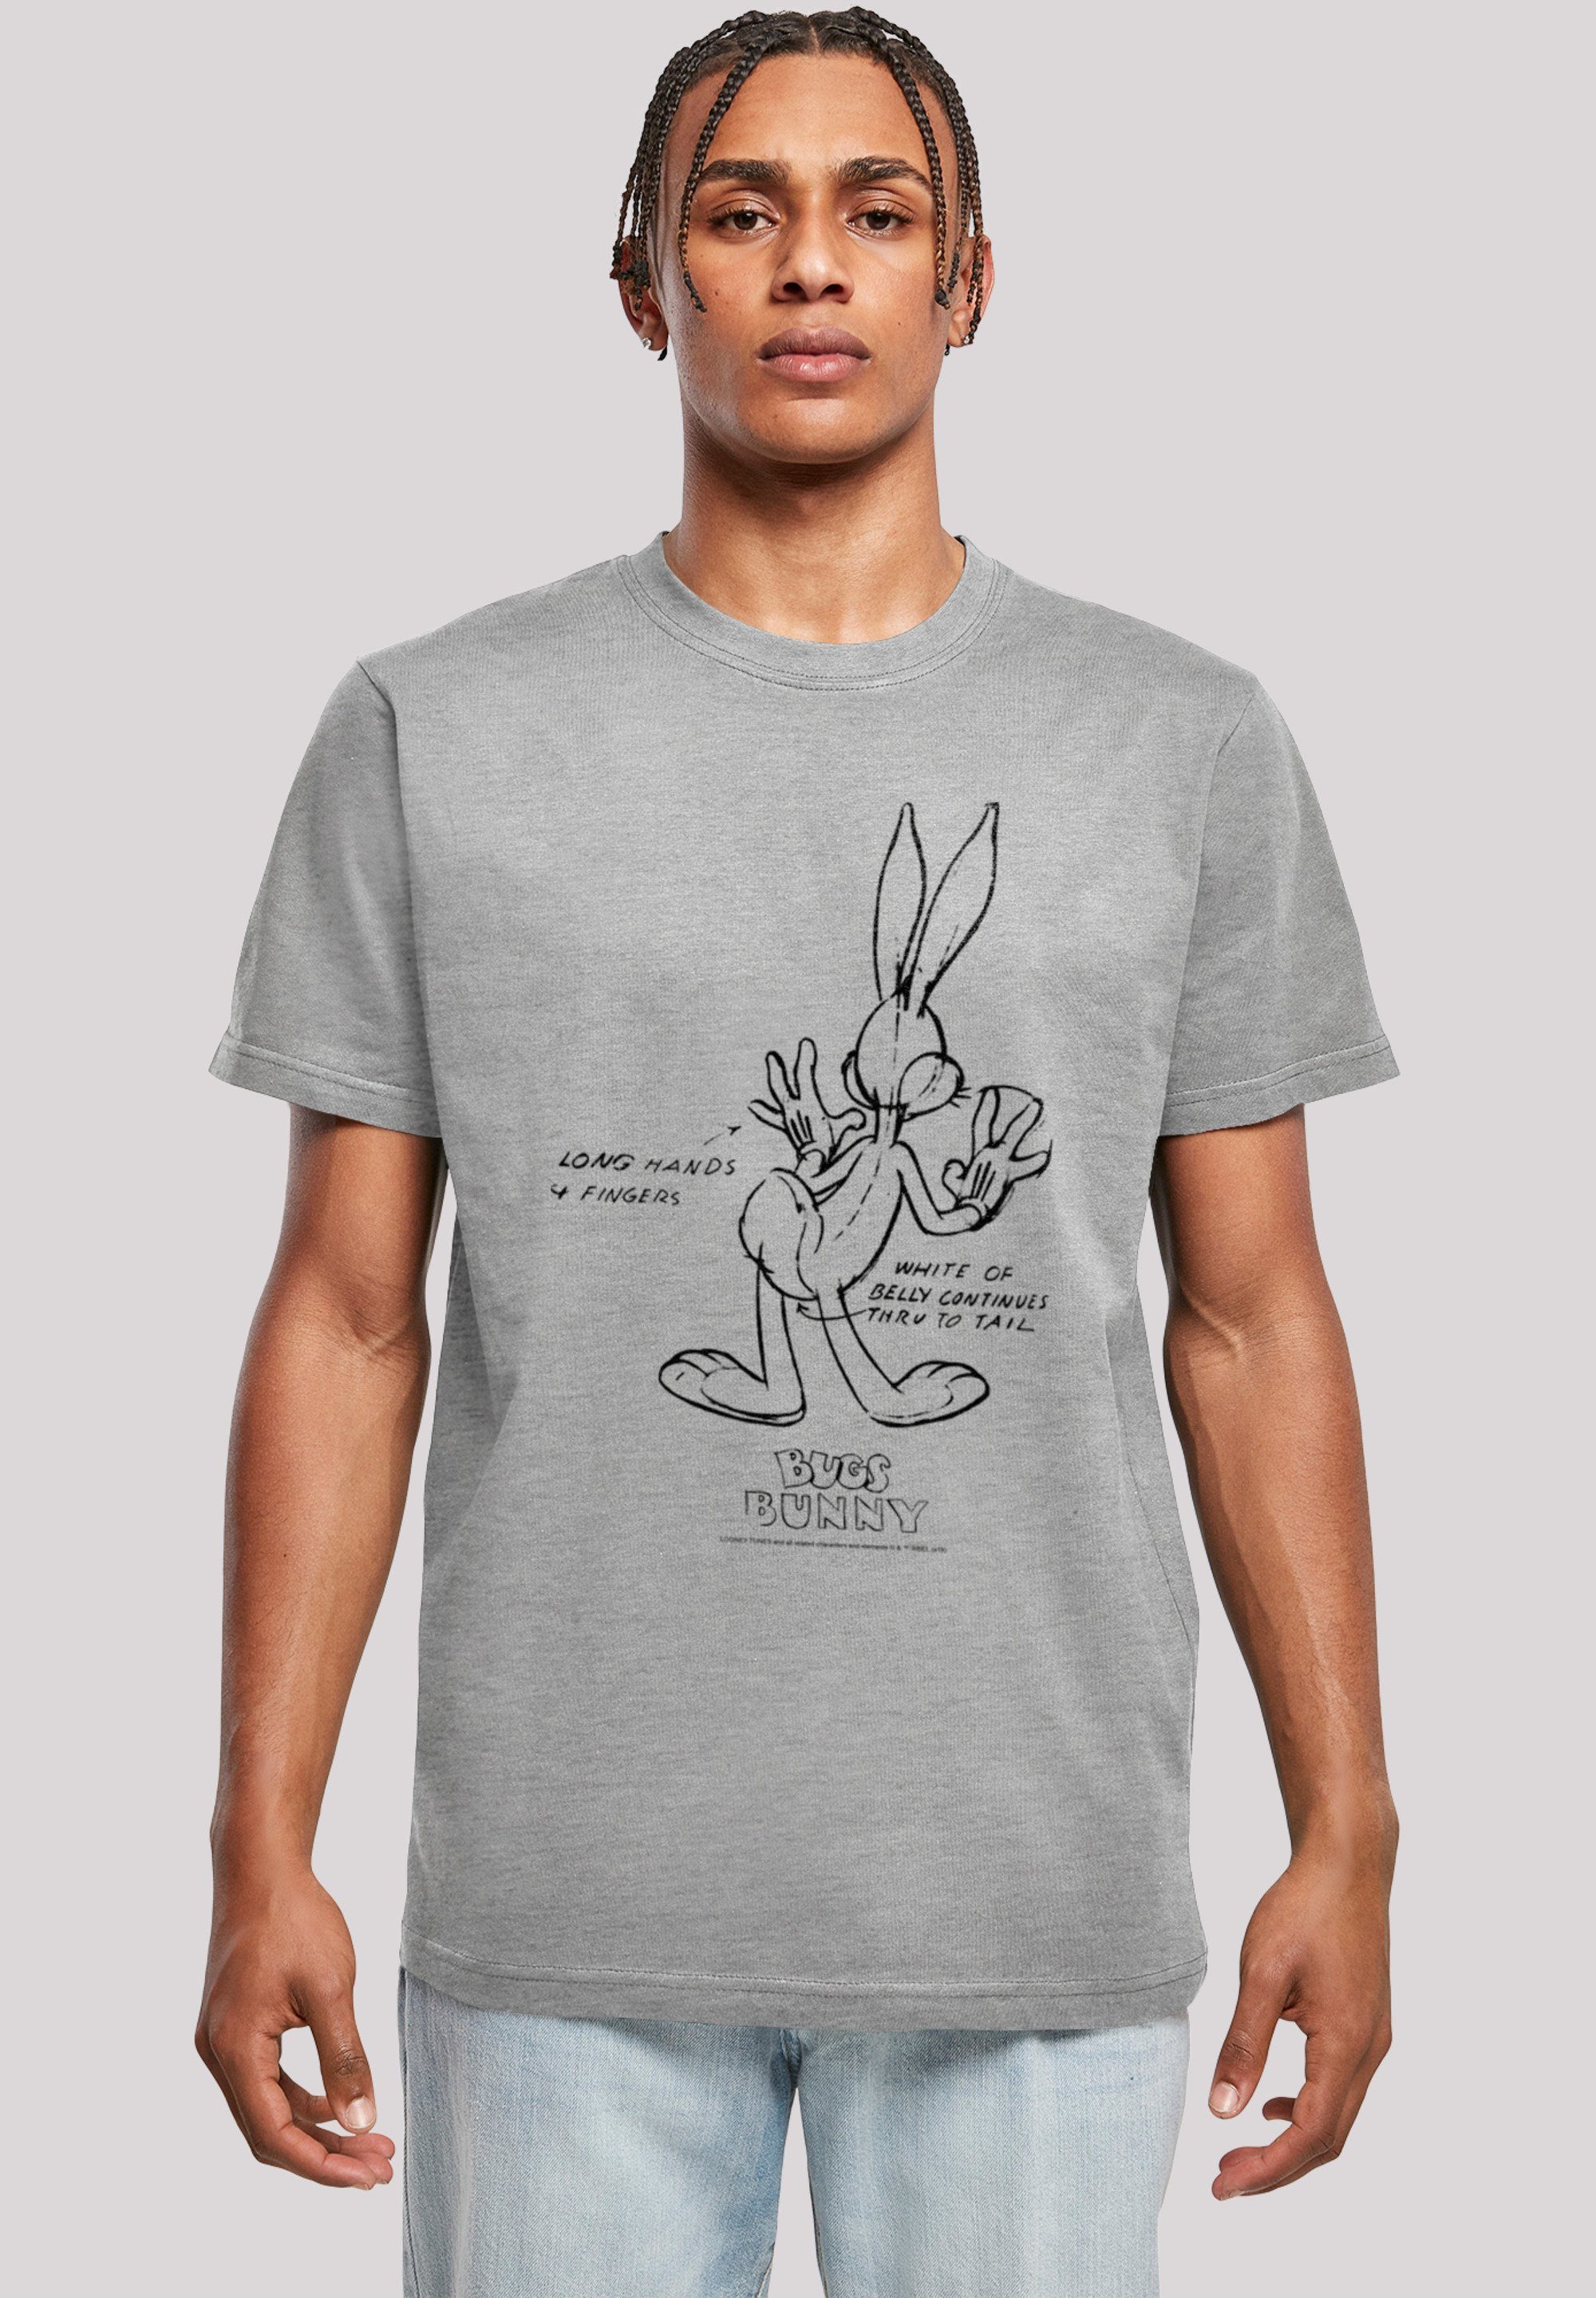 Print F4NT4STIC T-Shirt Bunny Looney heather White Tunes Bugs grey Belly